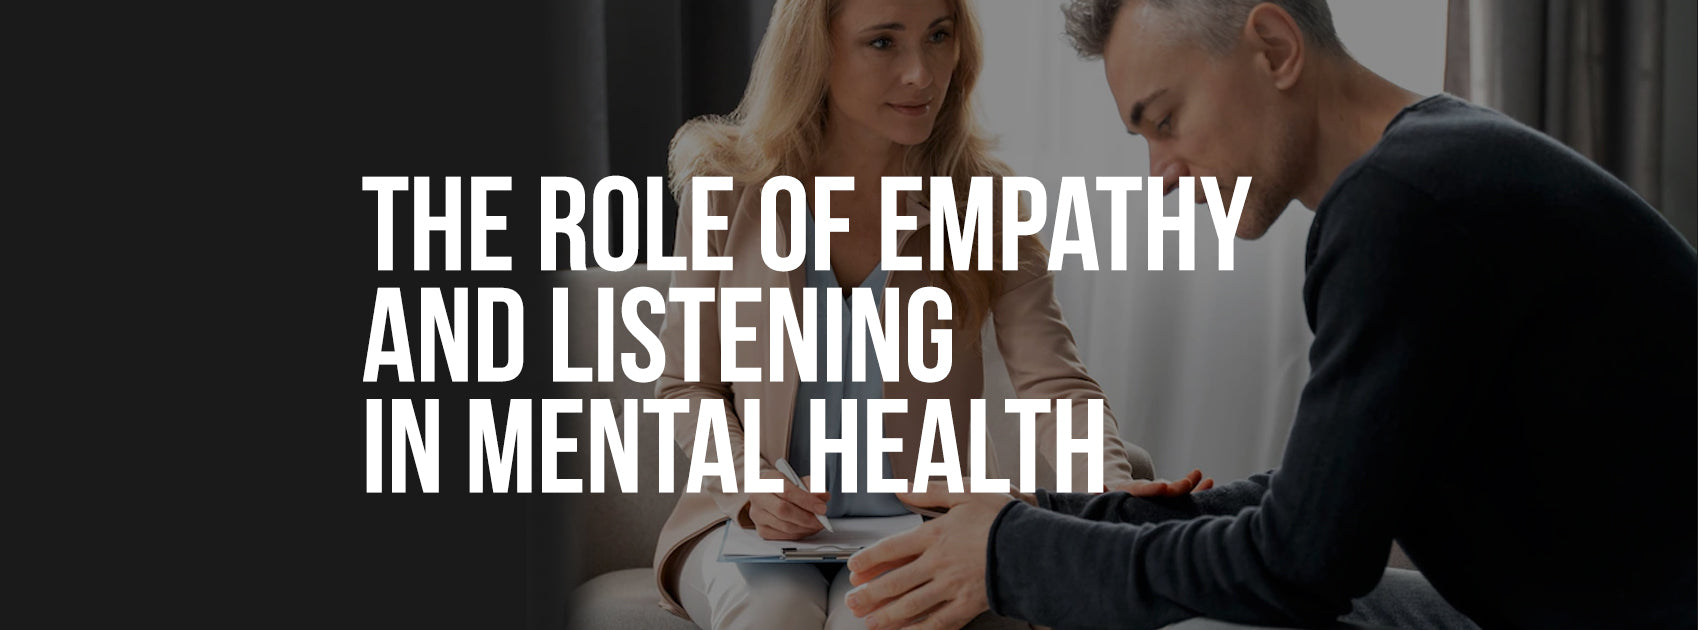 The Role of Empathy and Listening in Mental Health